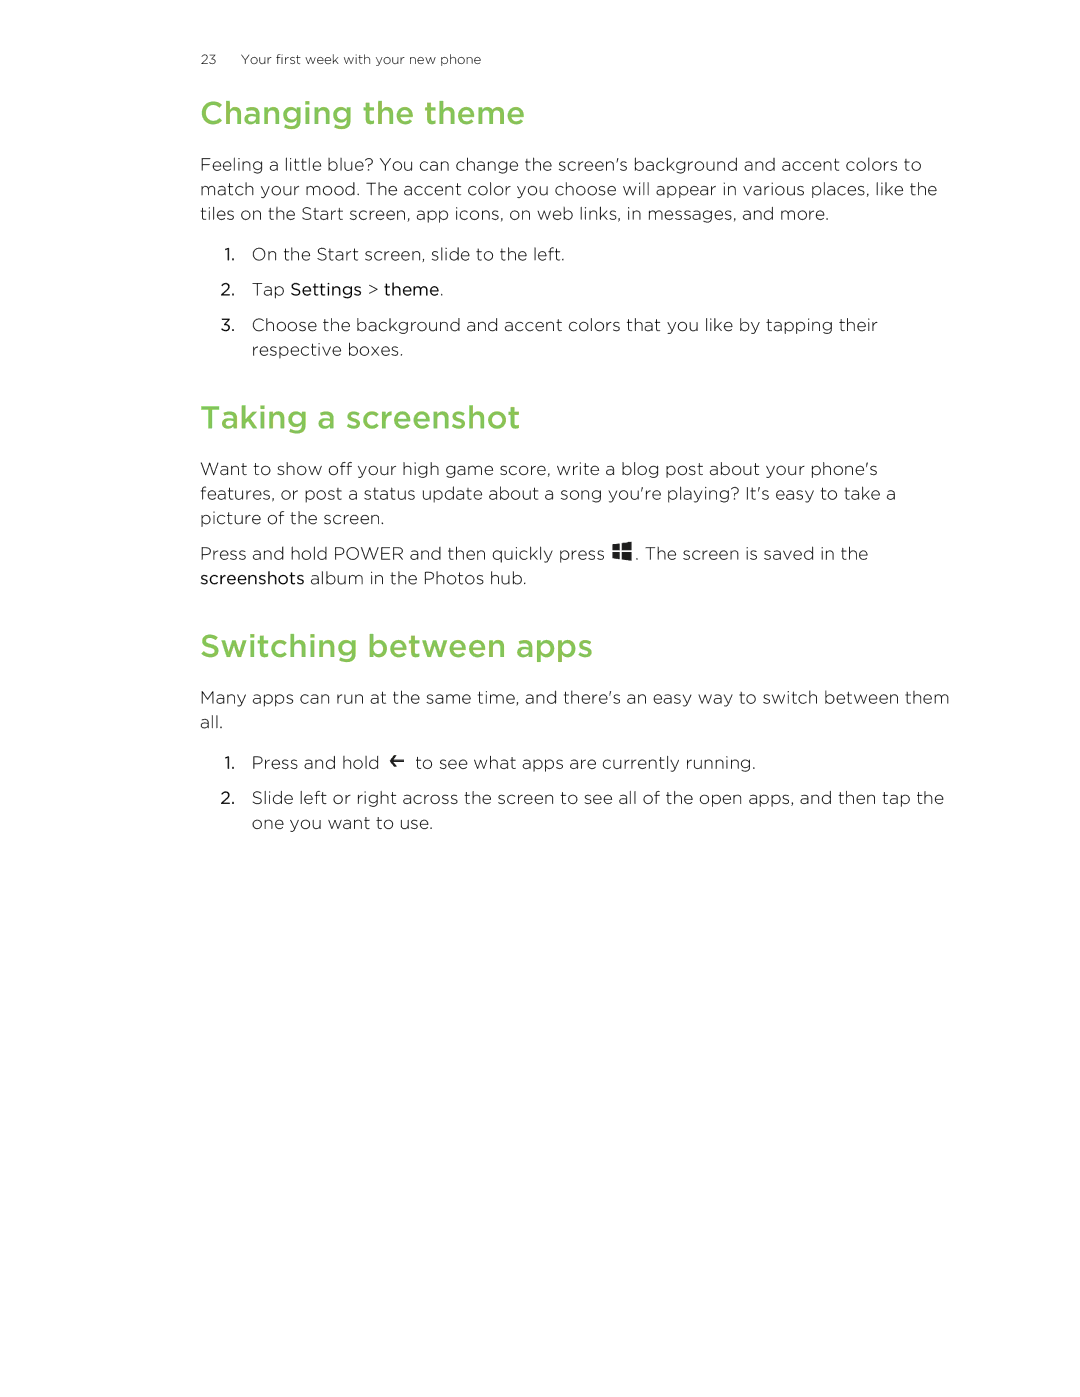 HTC 8X manual Changing the theme, Taking a screenshot, Switching between apps 